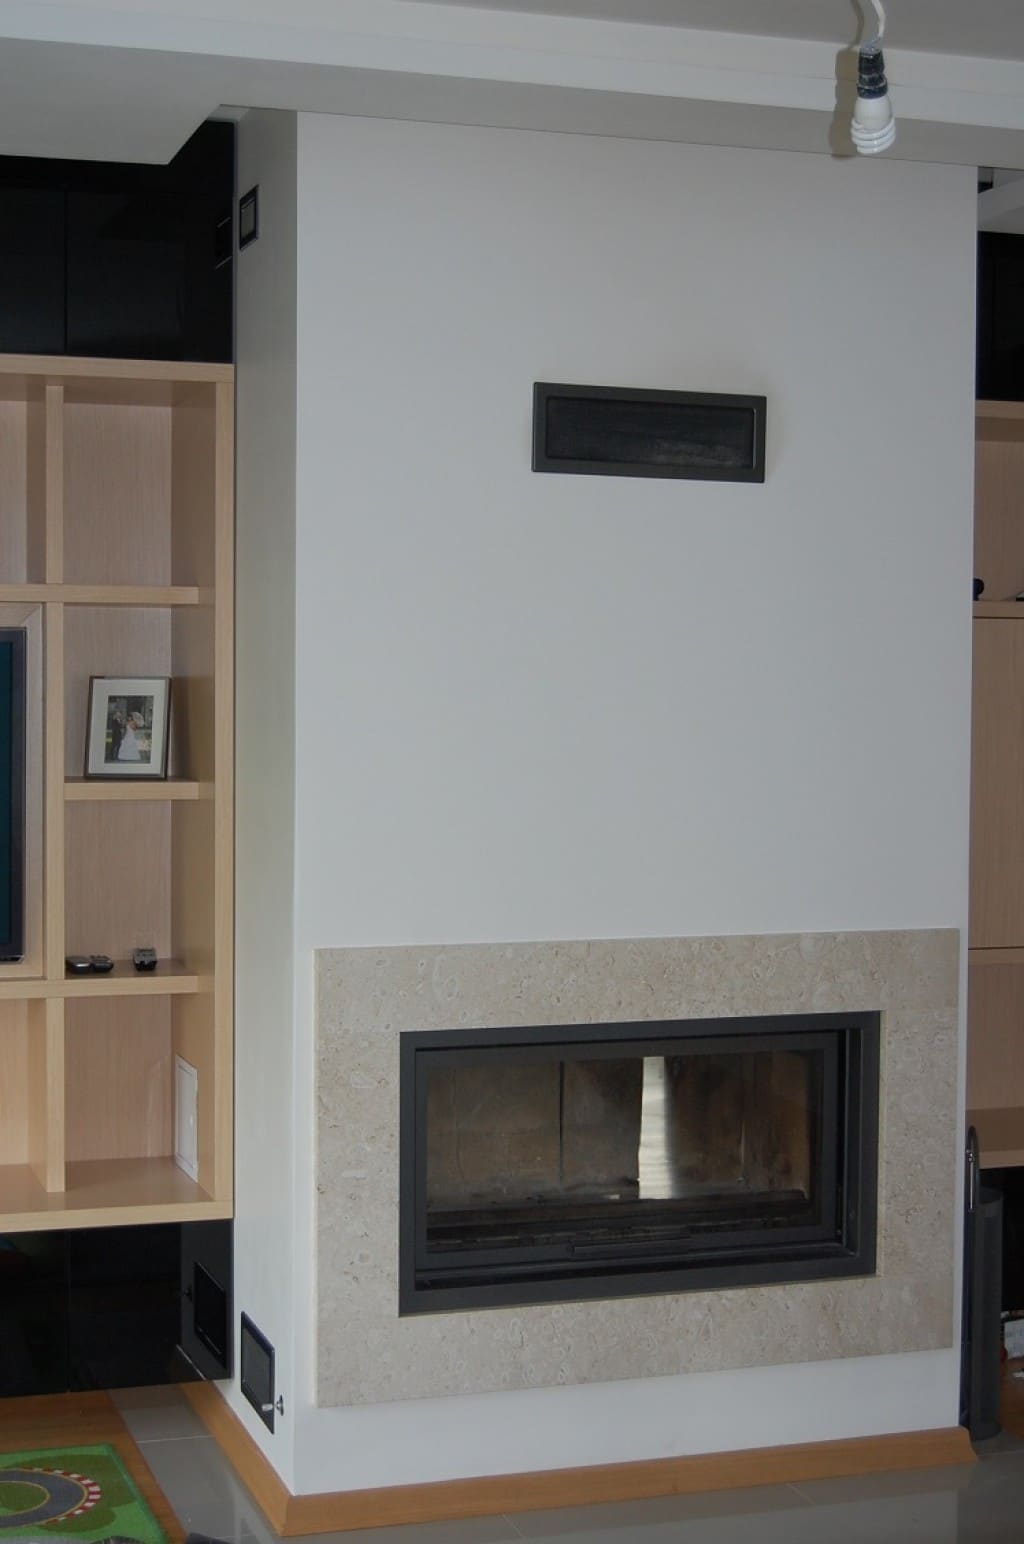 Blog - A fireplace in a room, where to position it ?